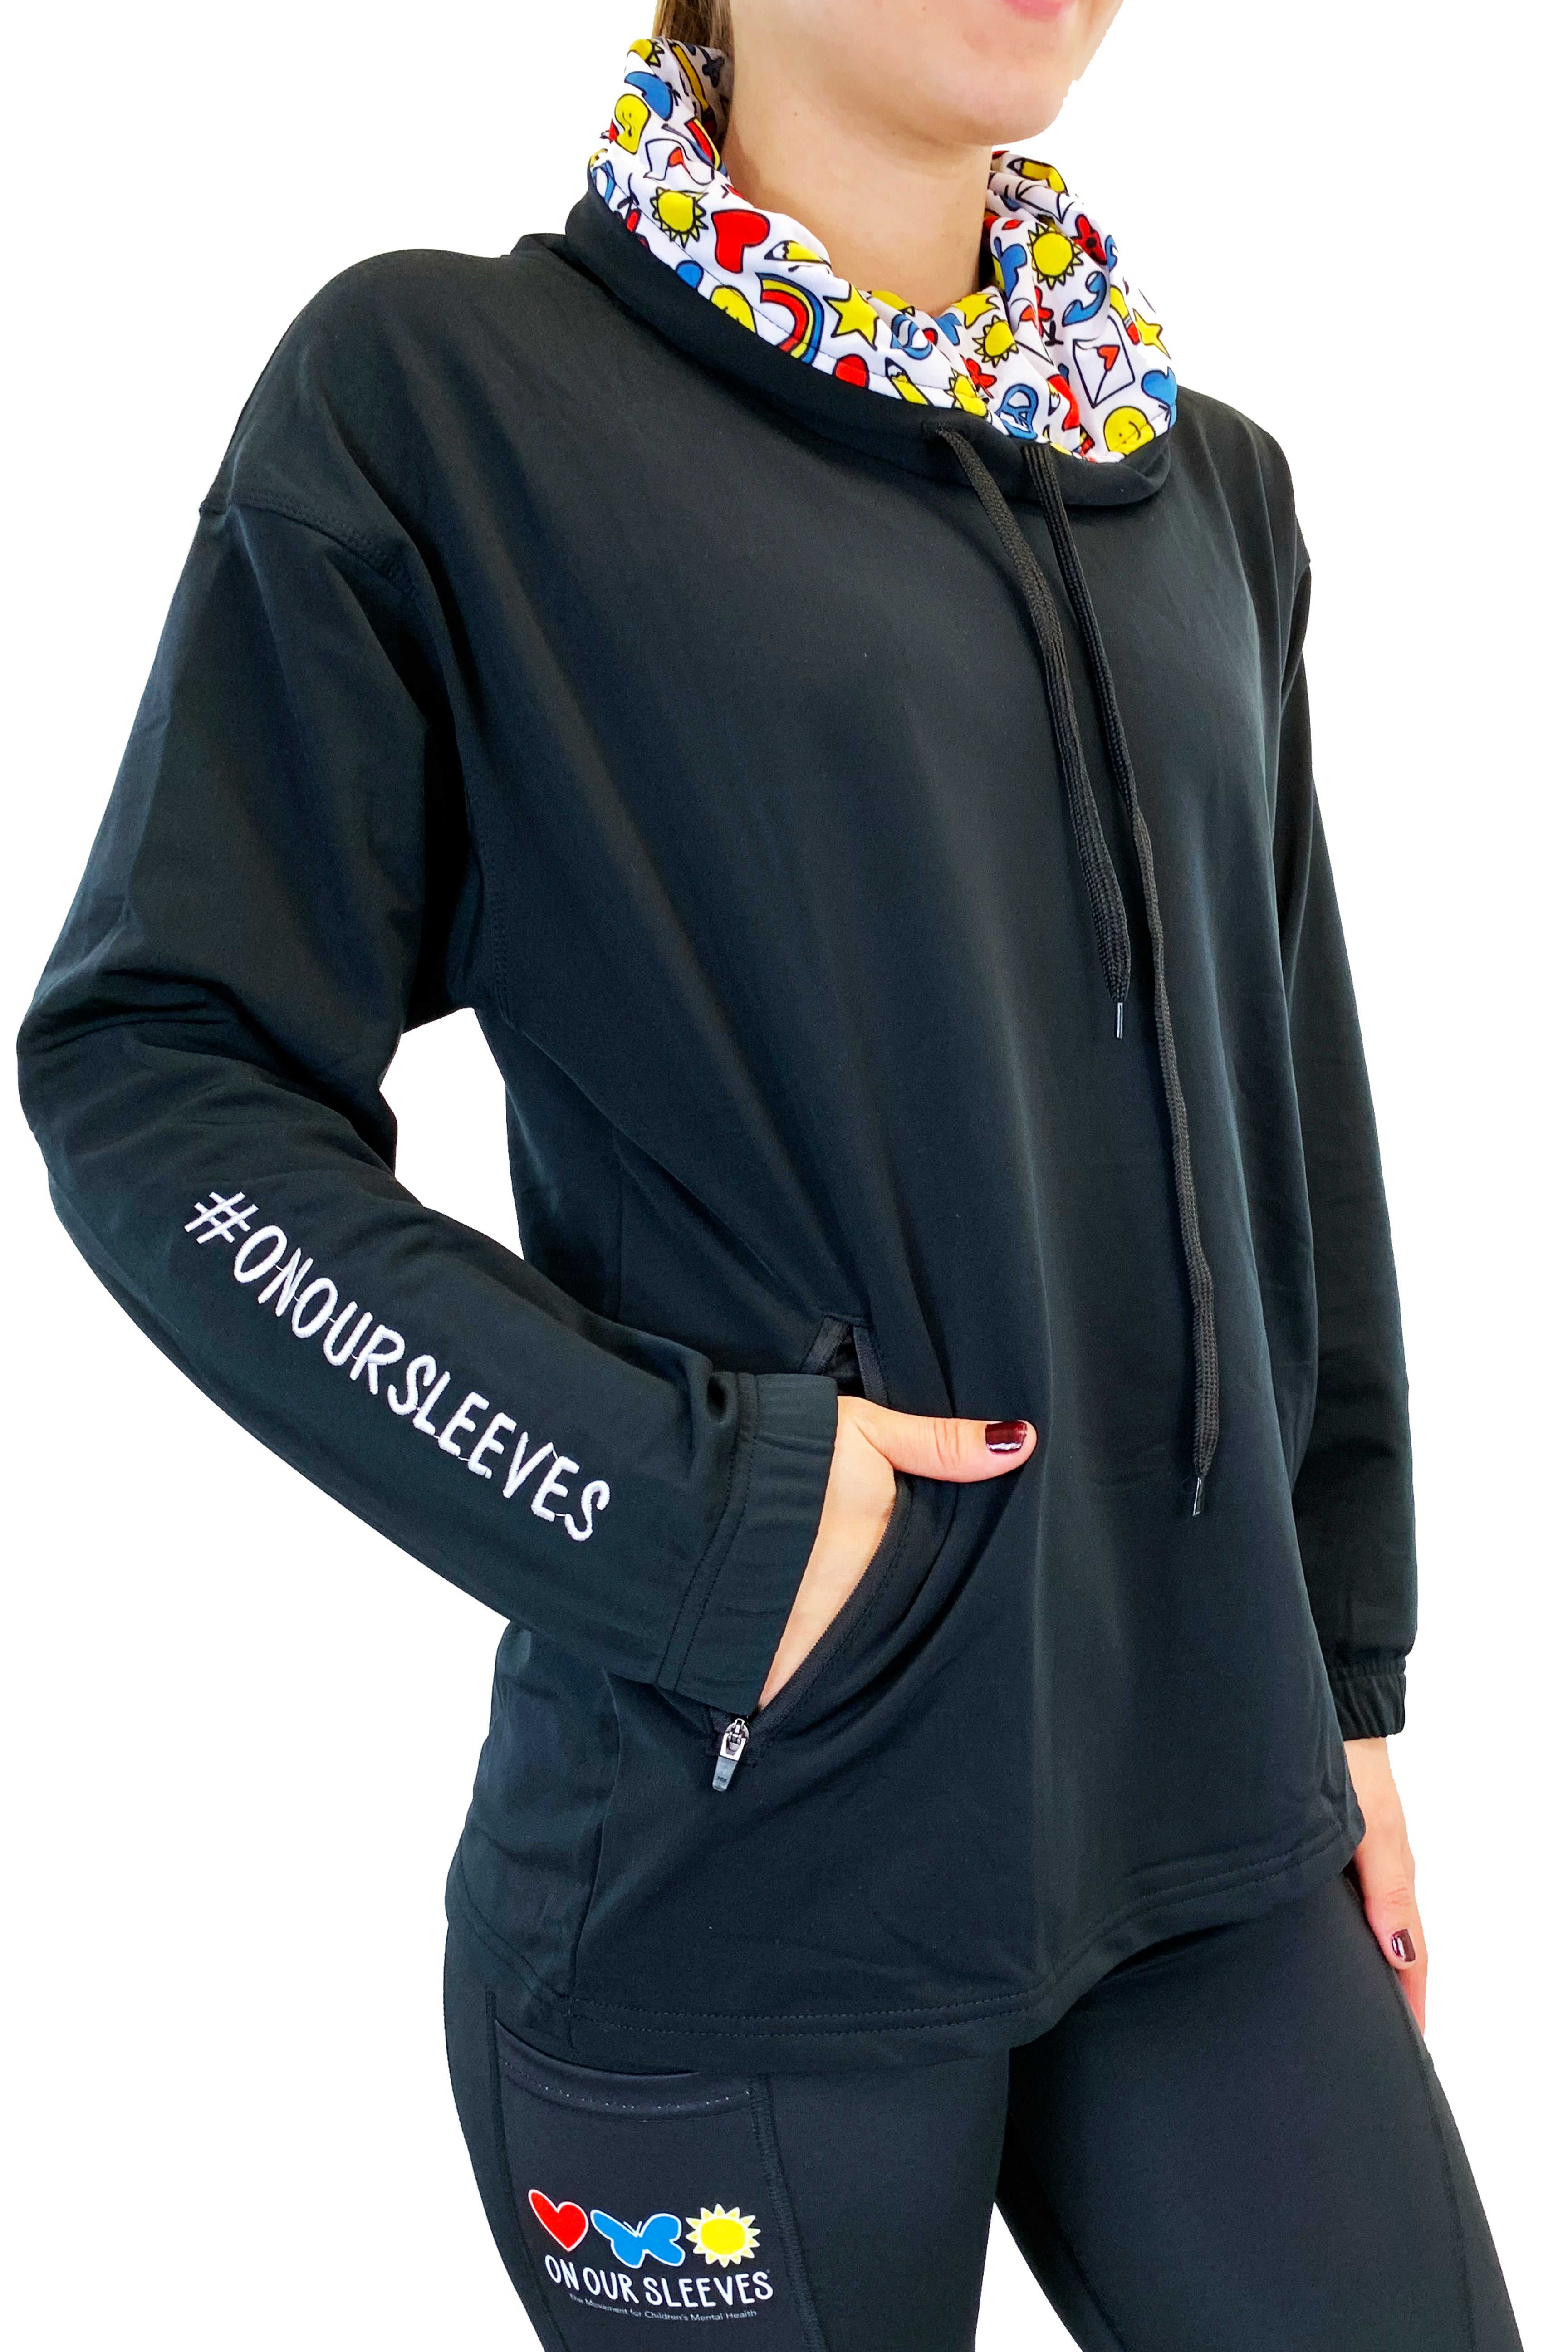 3108 - The  "On Our Sleeves" Snorkel Neck/Black